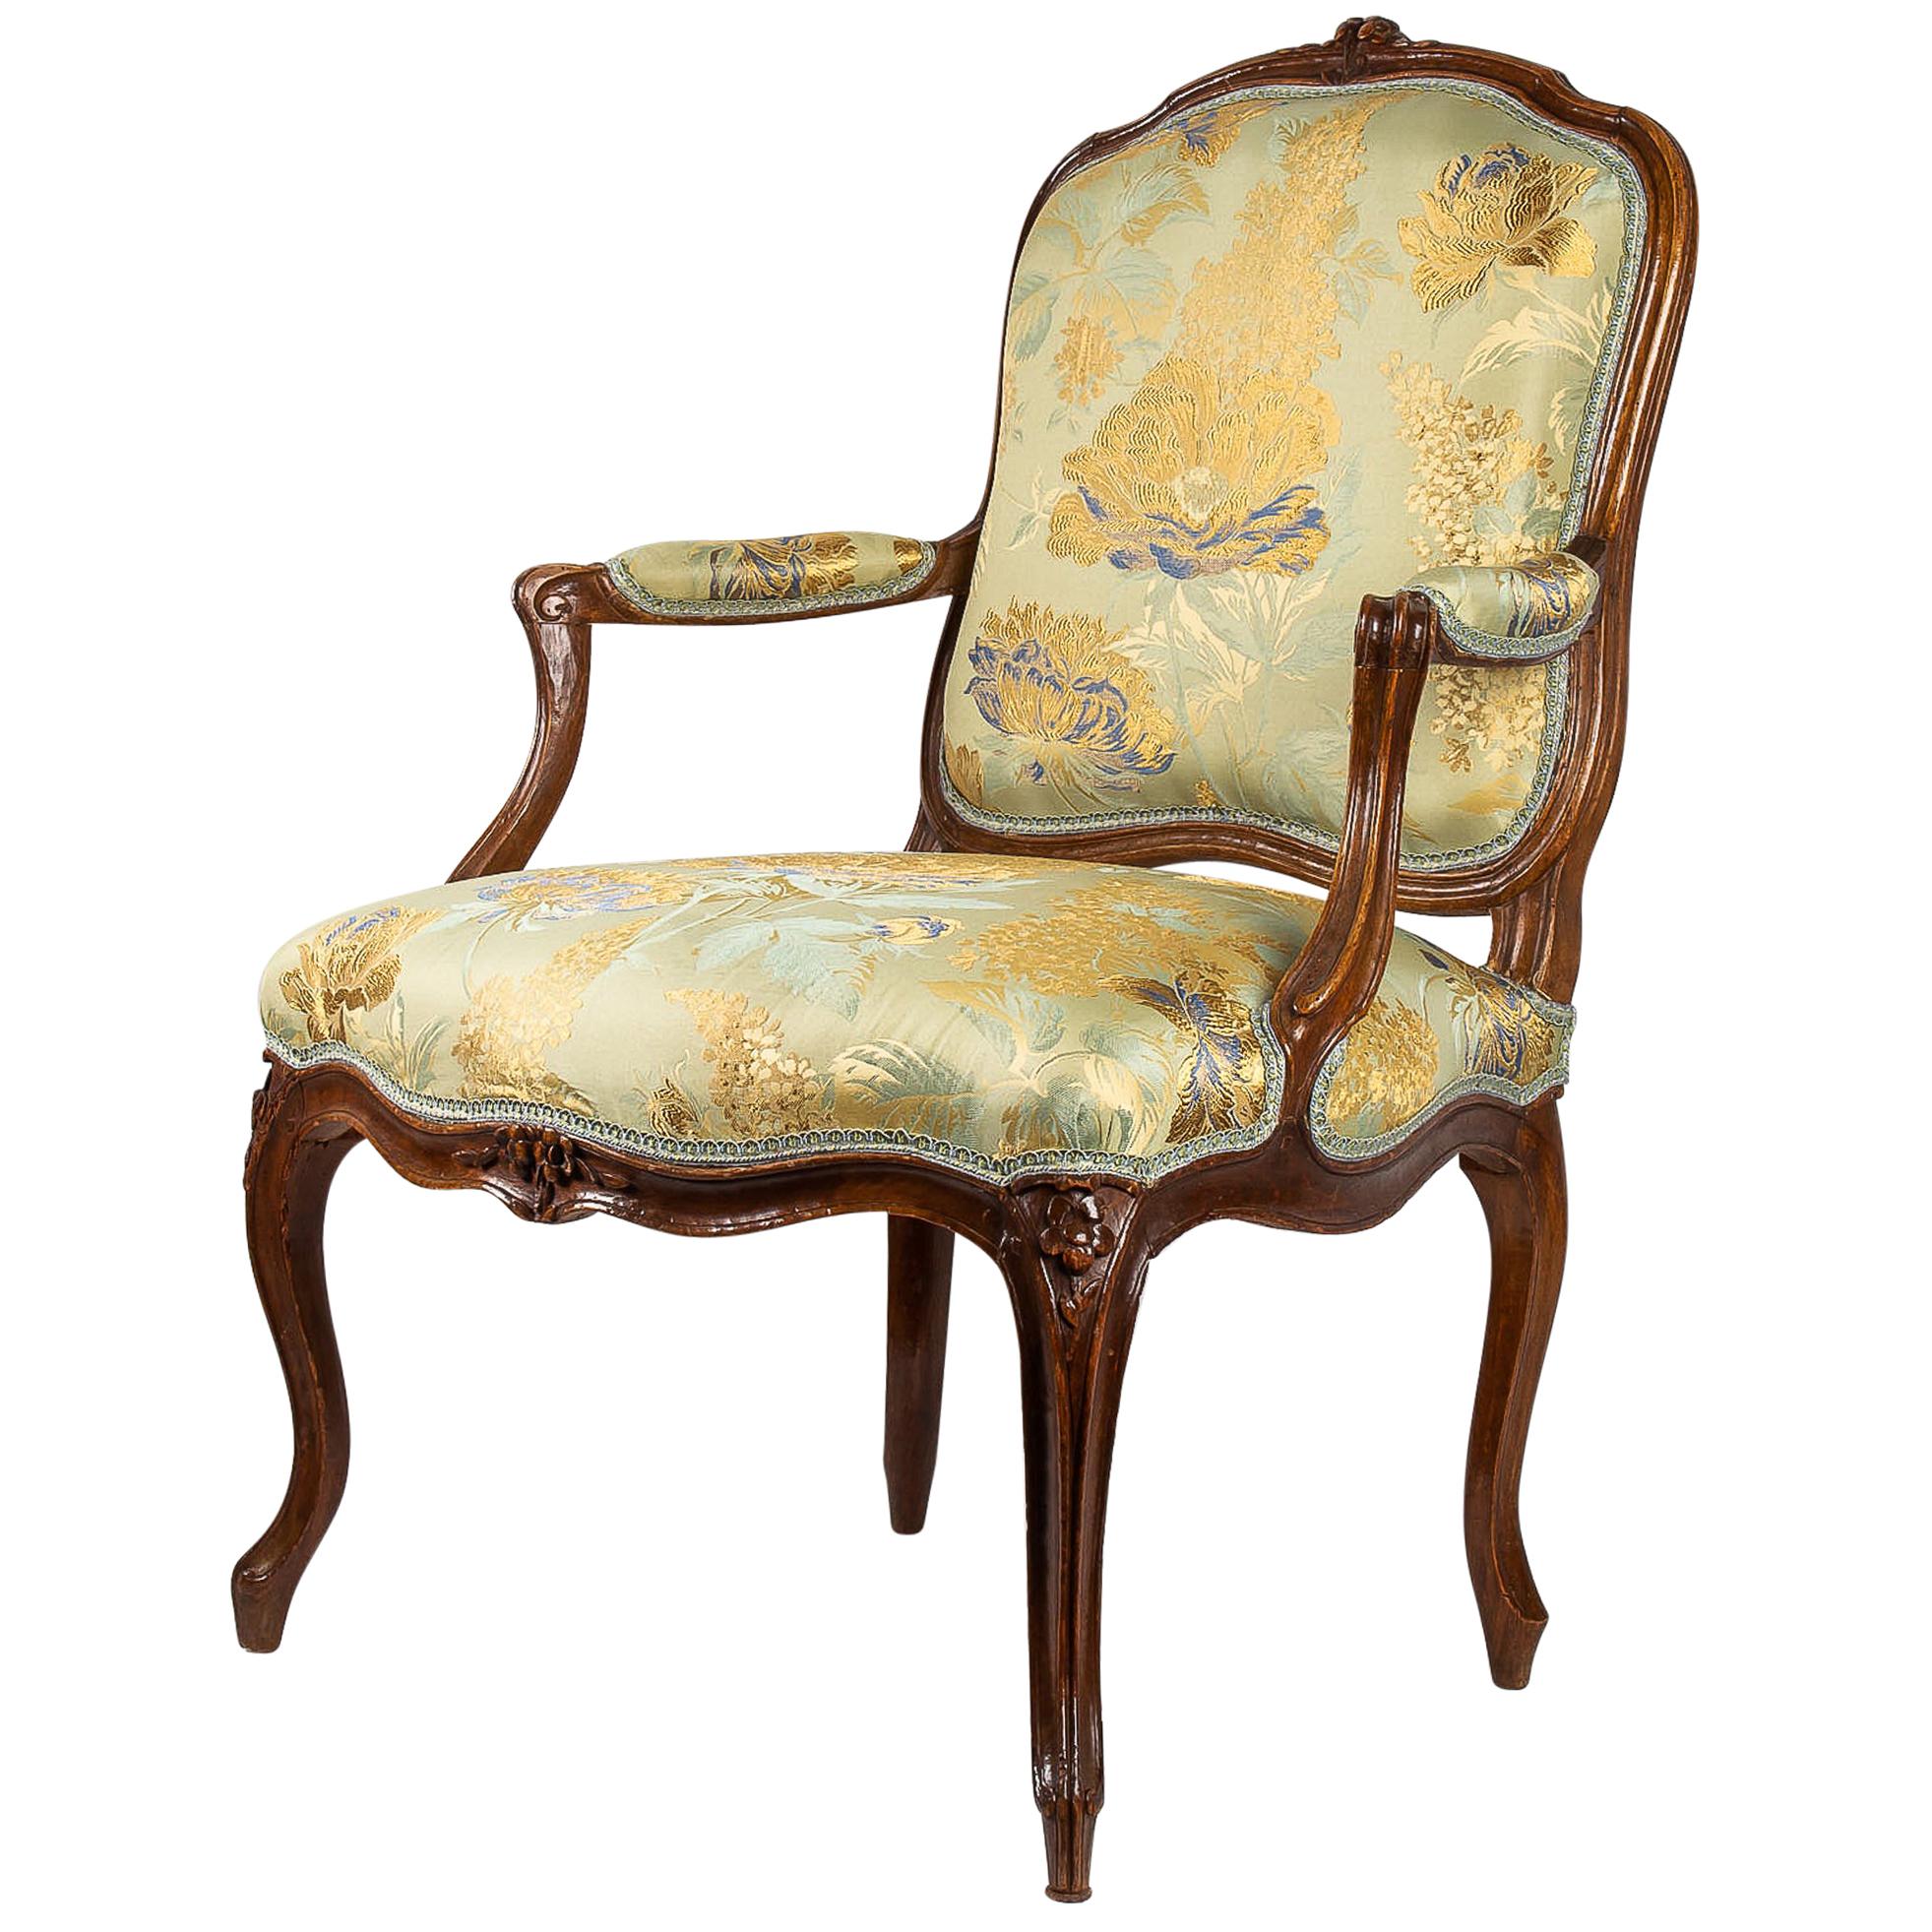 Louis XV Period Set of 4 of Large Armchairs, circa 1766-1770 by Louis Delanois For Sale